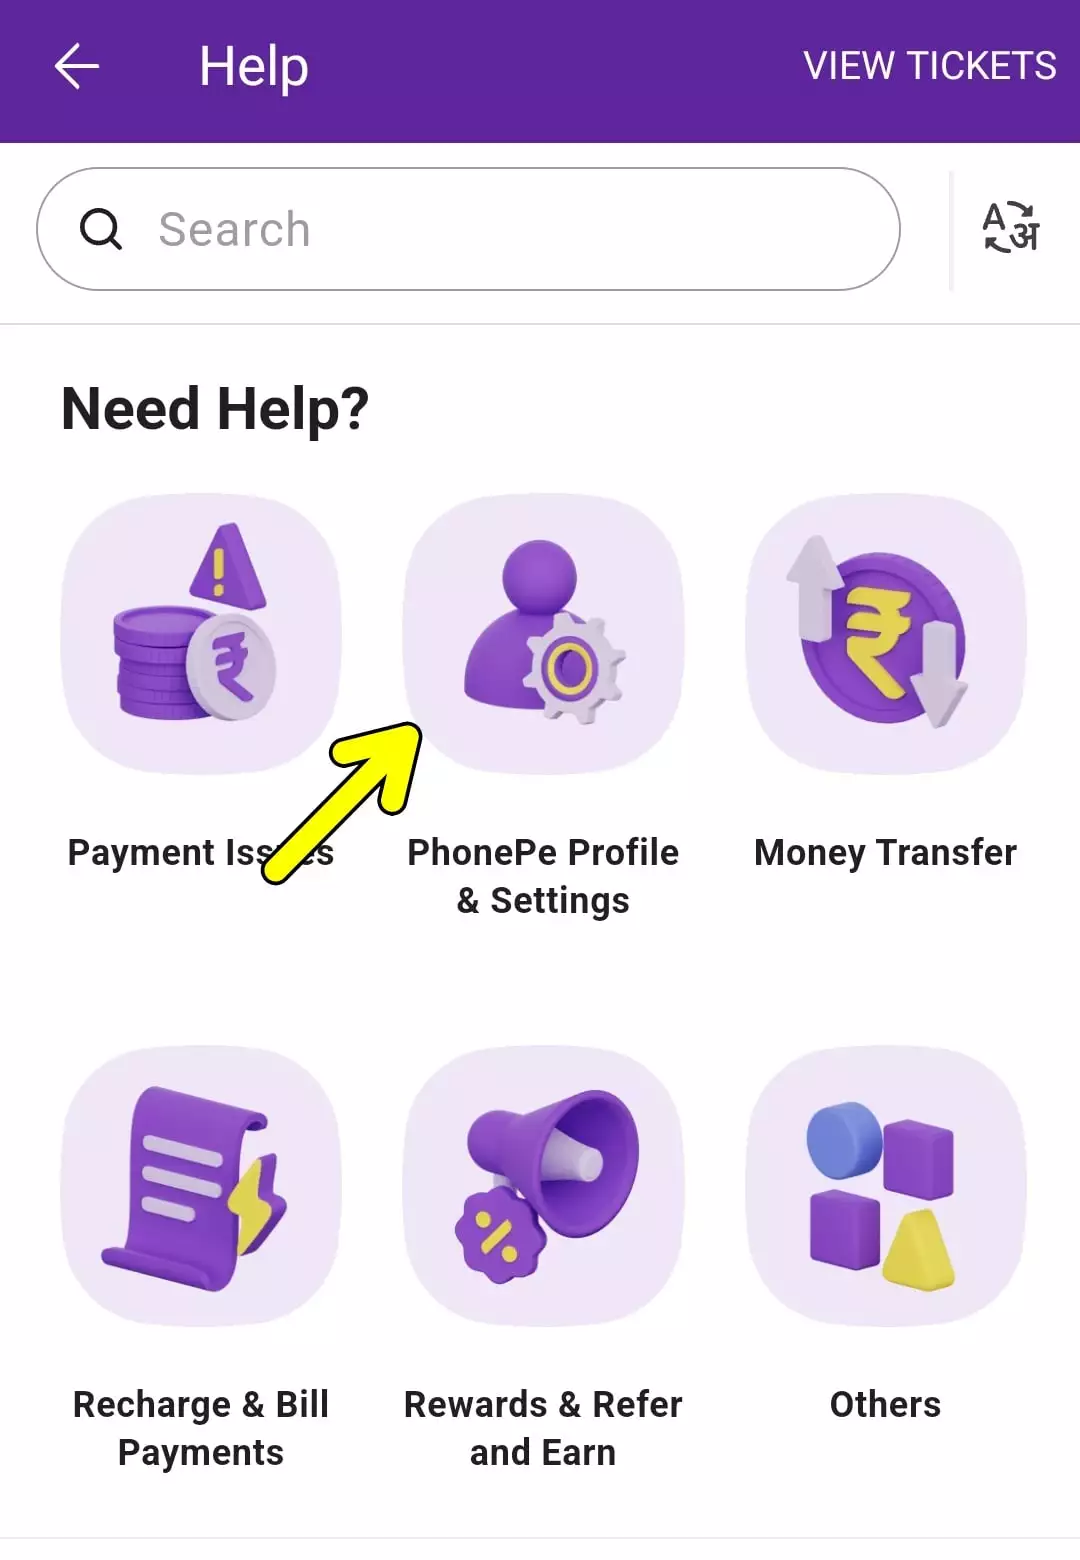 How To Delete PhonePe Account